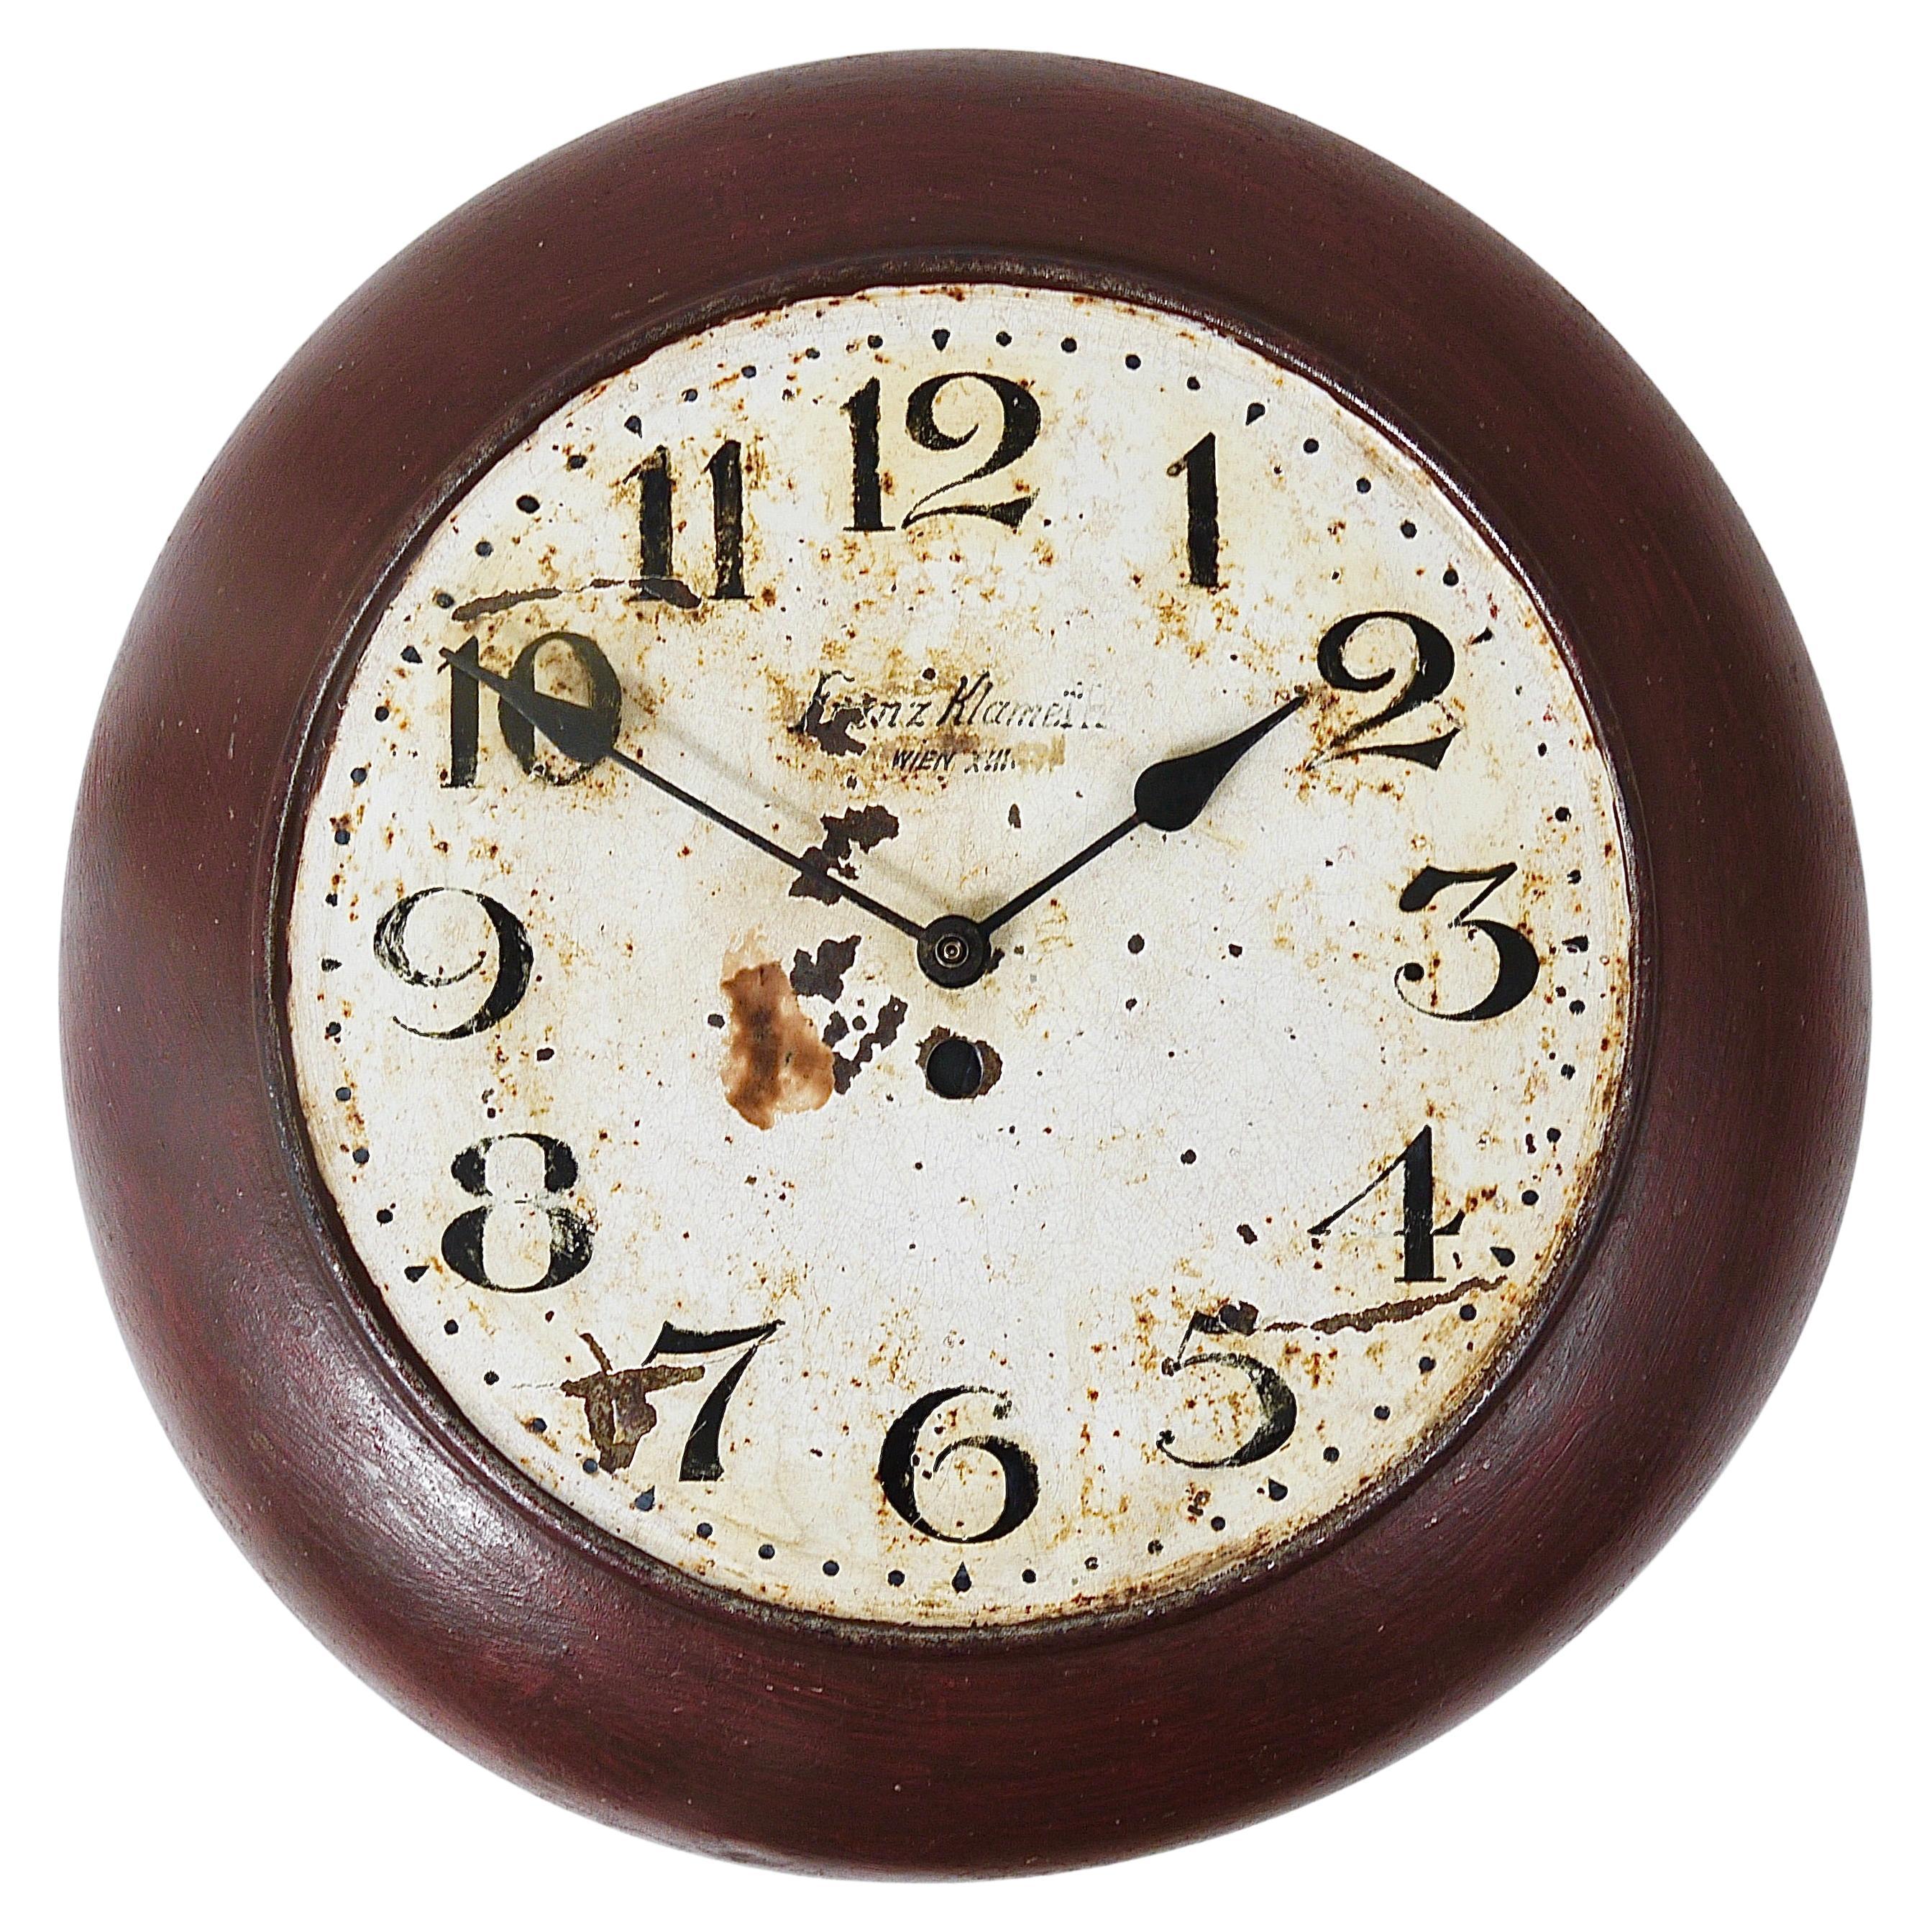 Antique 1920s Public Iron Wall Clock With Hand-Painted Dial, Industrial Style For Sale